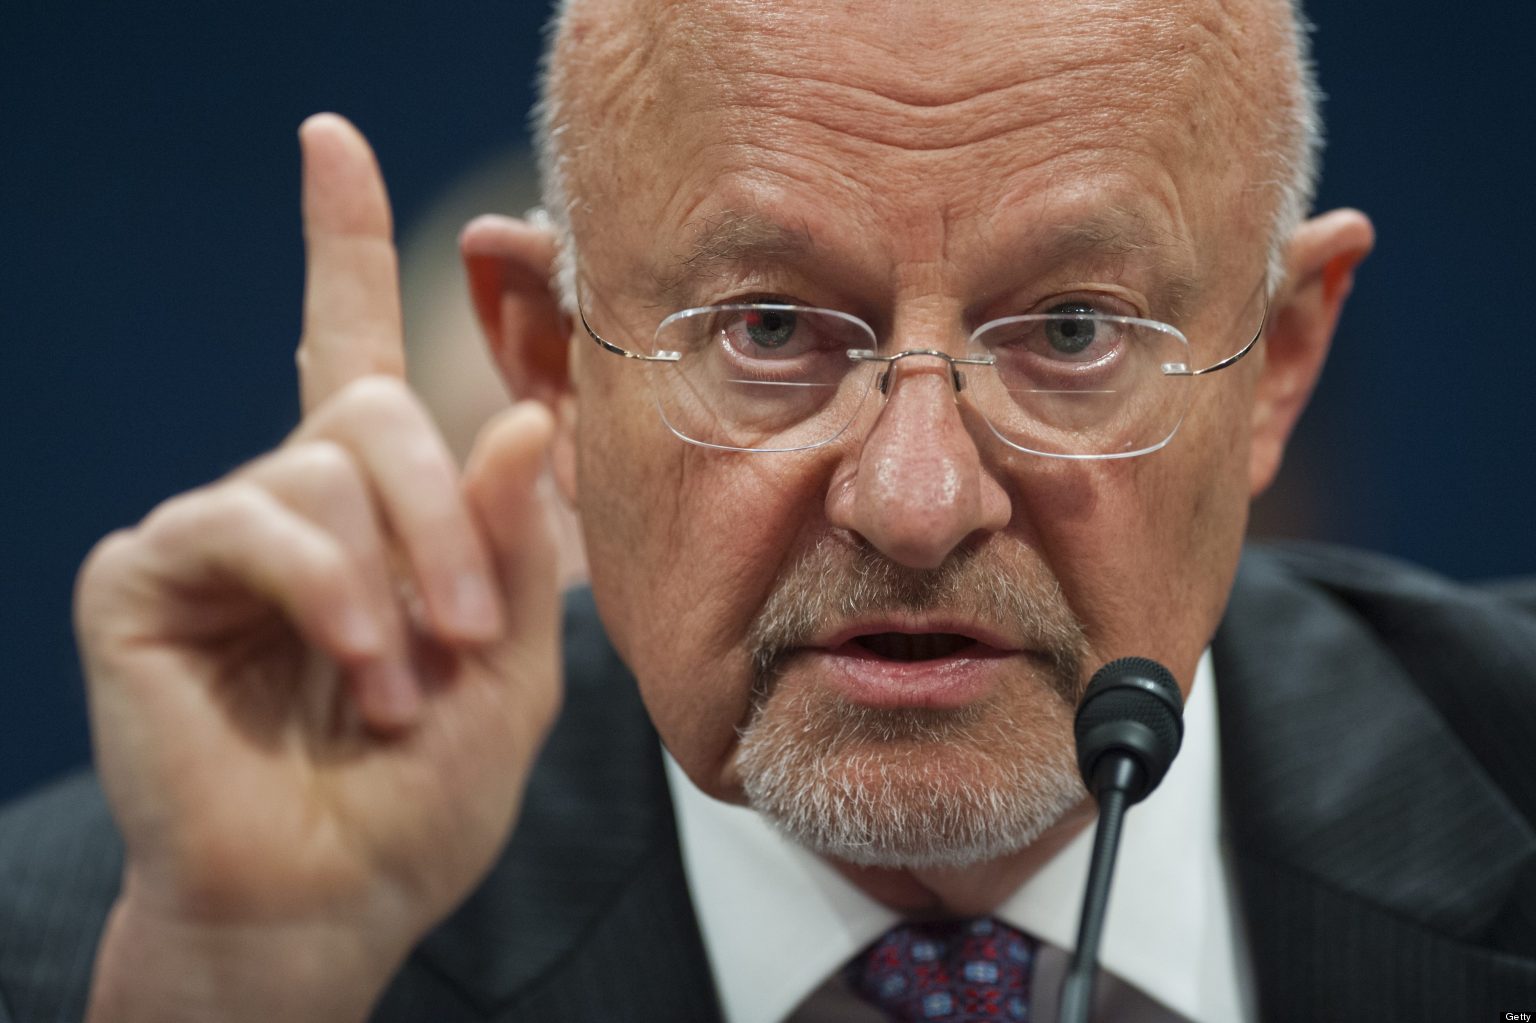 James Clapper, the US Director of National Intelligence